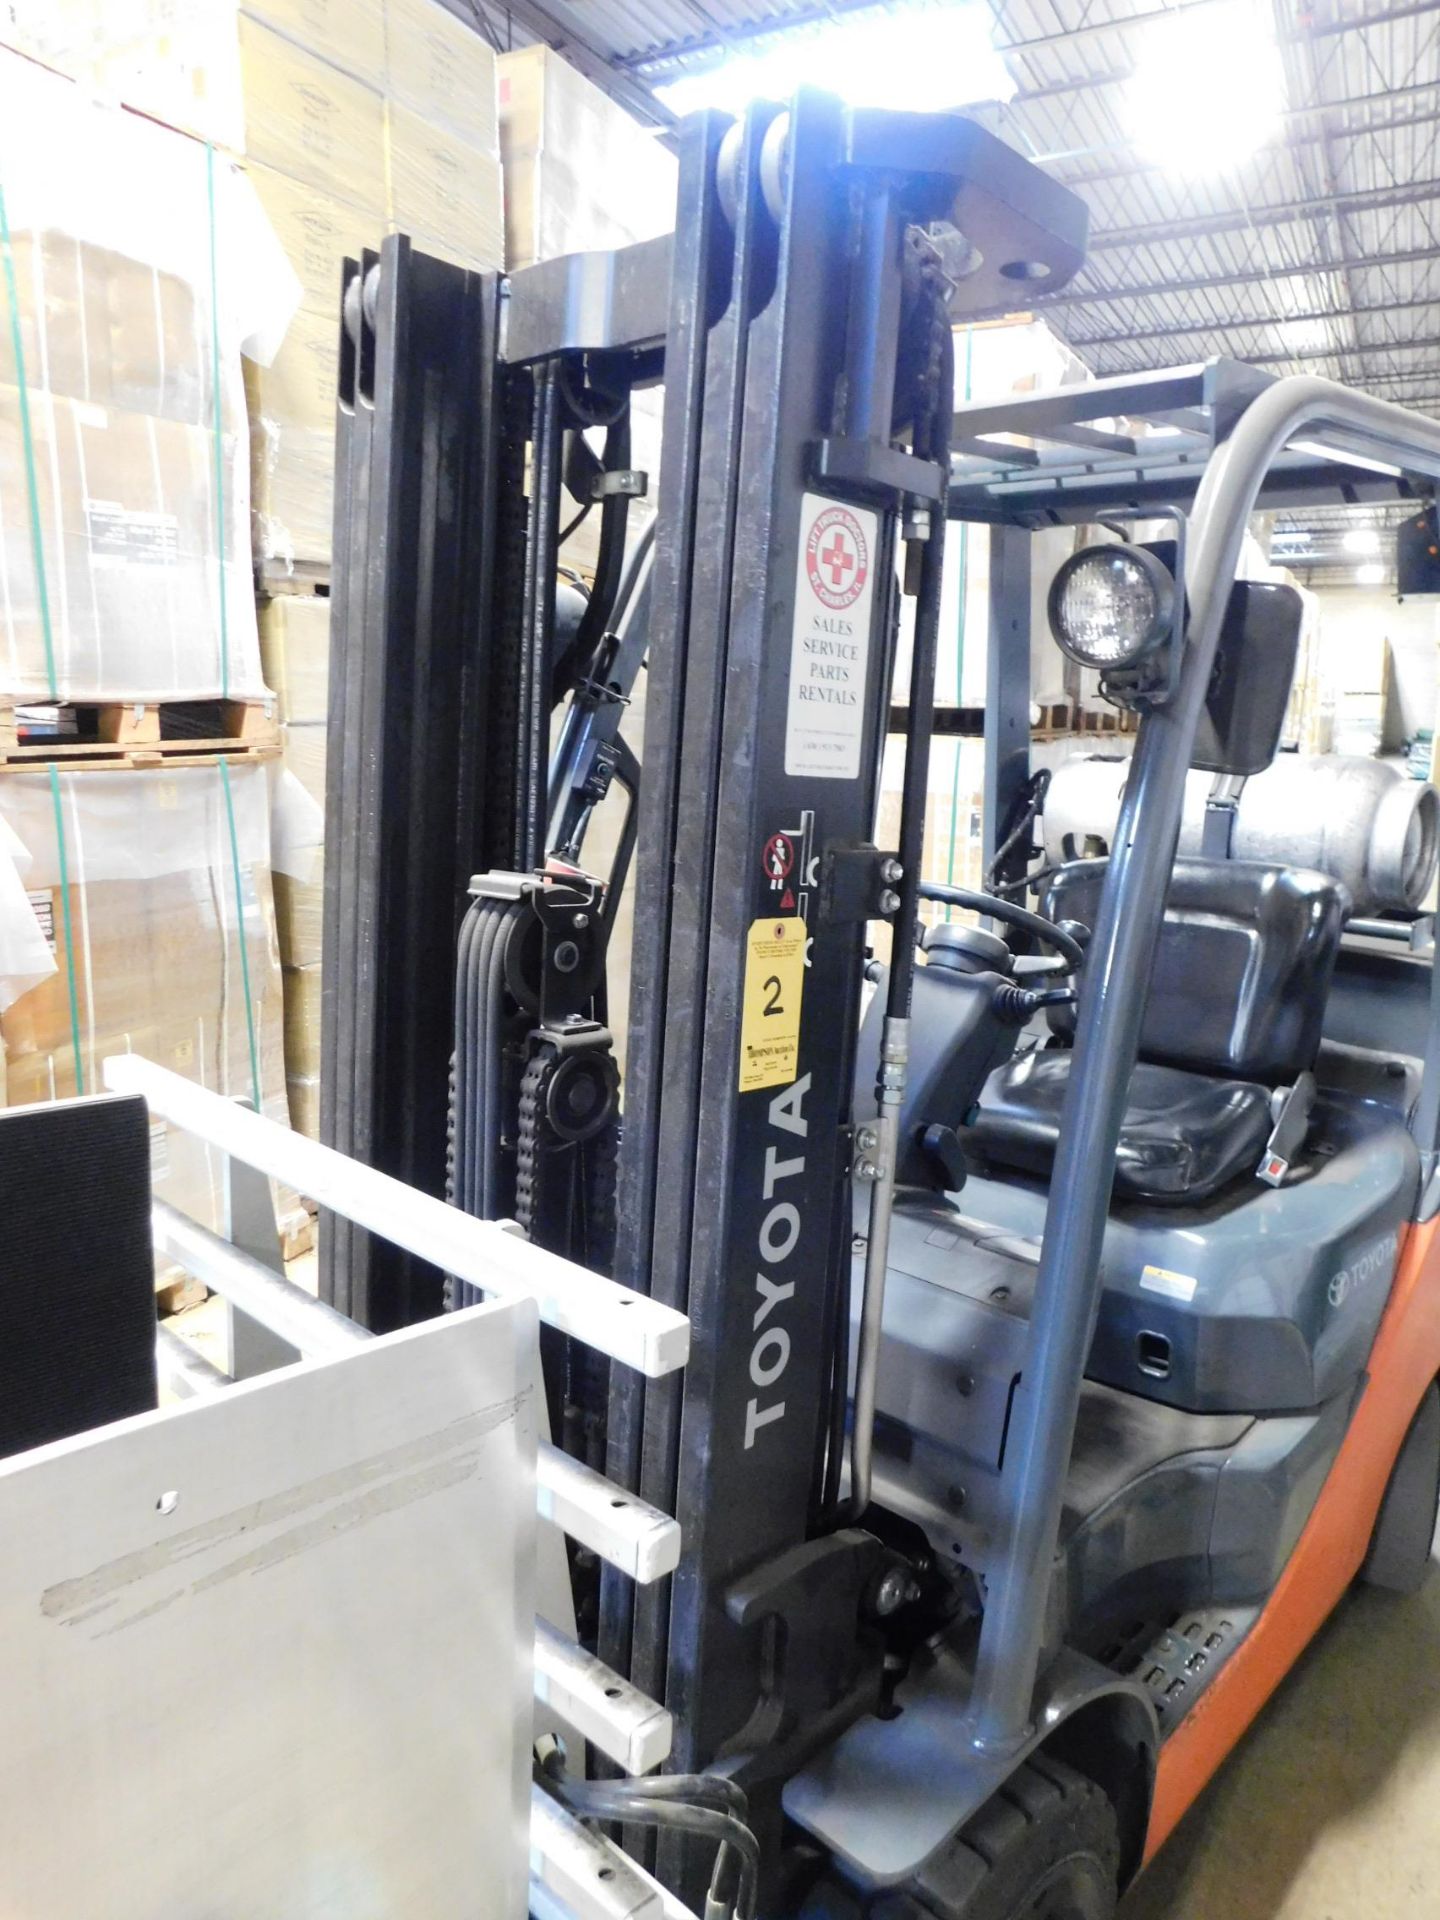 2010 Toyota Forklift, Model 8FGCU25, s/n 27407, 7,257 hrs., with Cascade Model R35D-CCS Clamp, 3,500 - Image 16 of 16